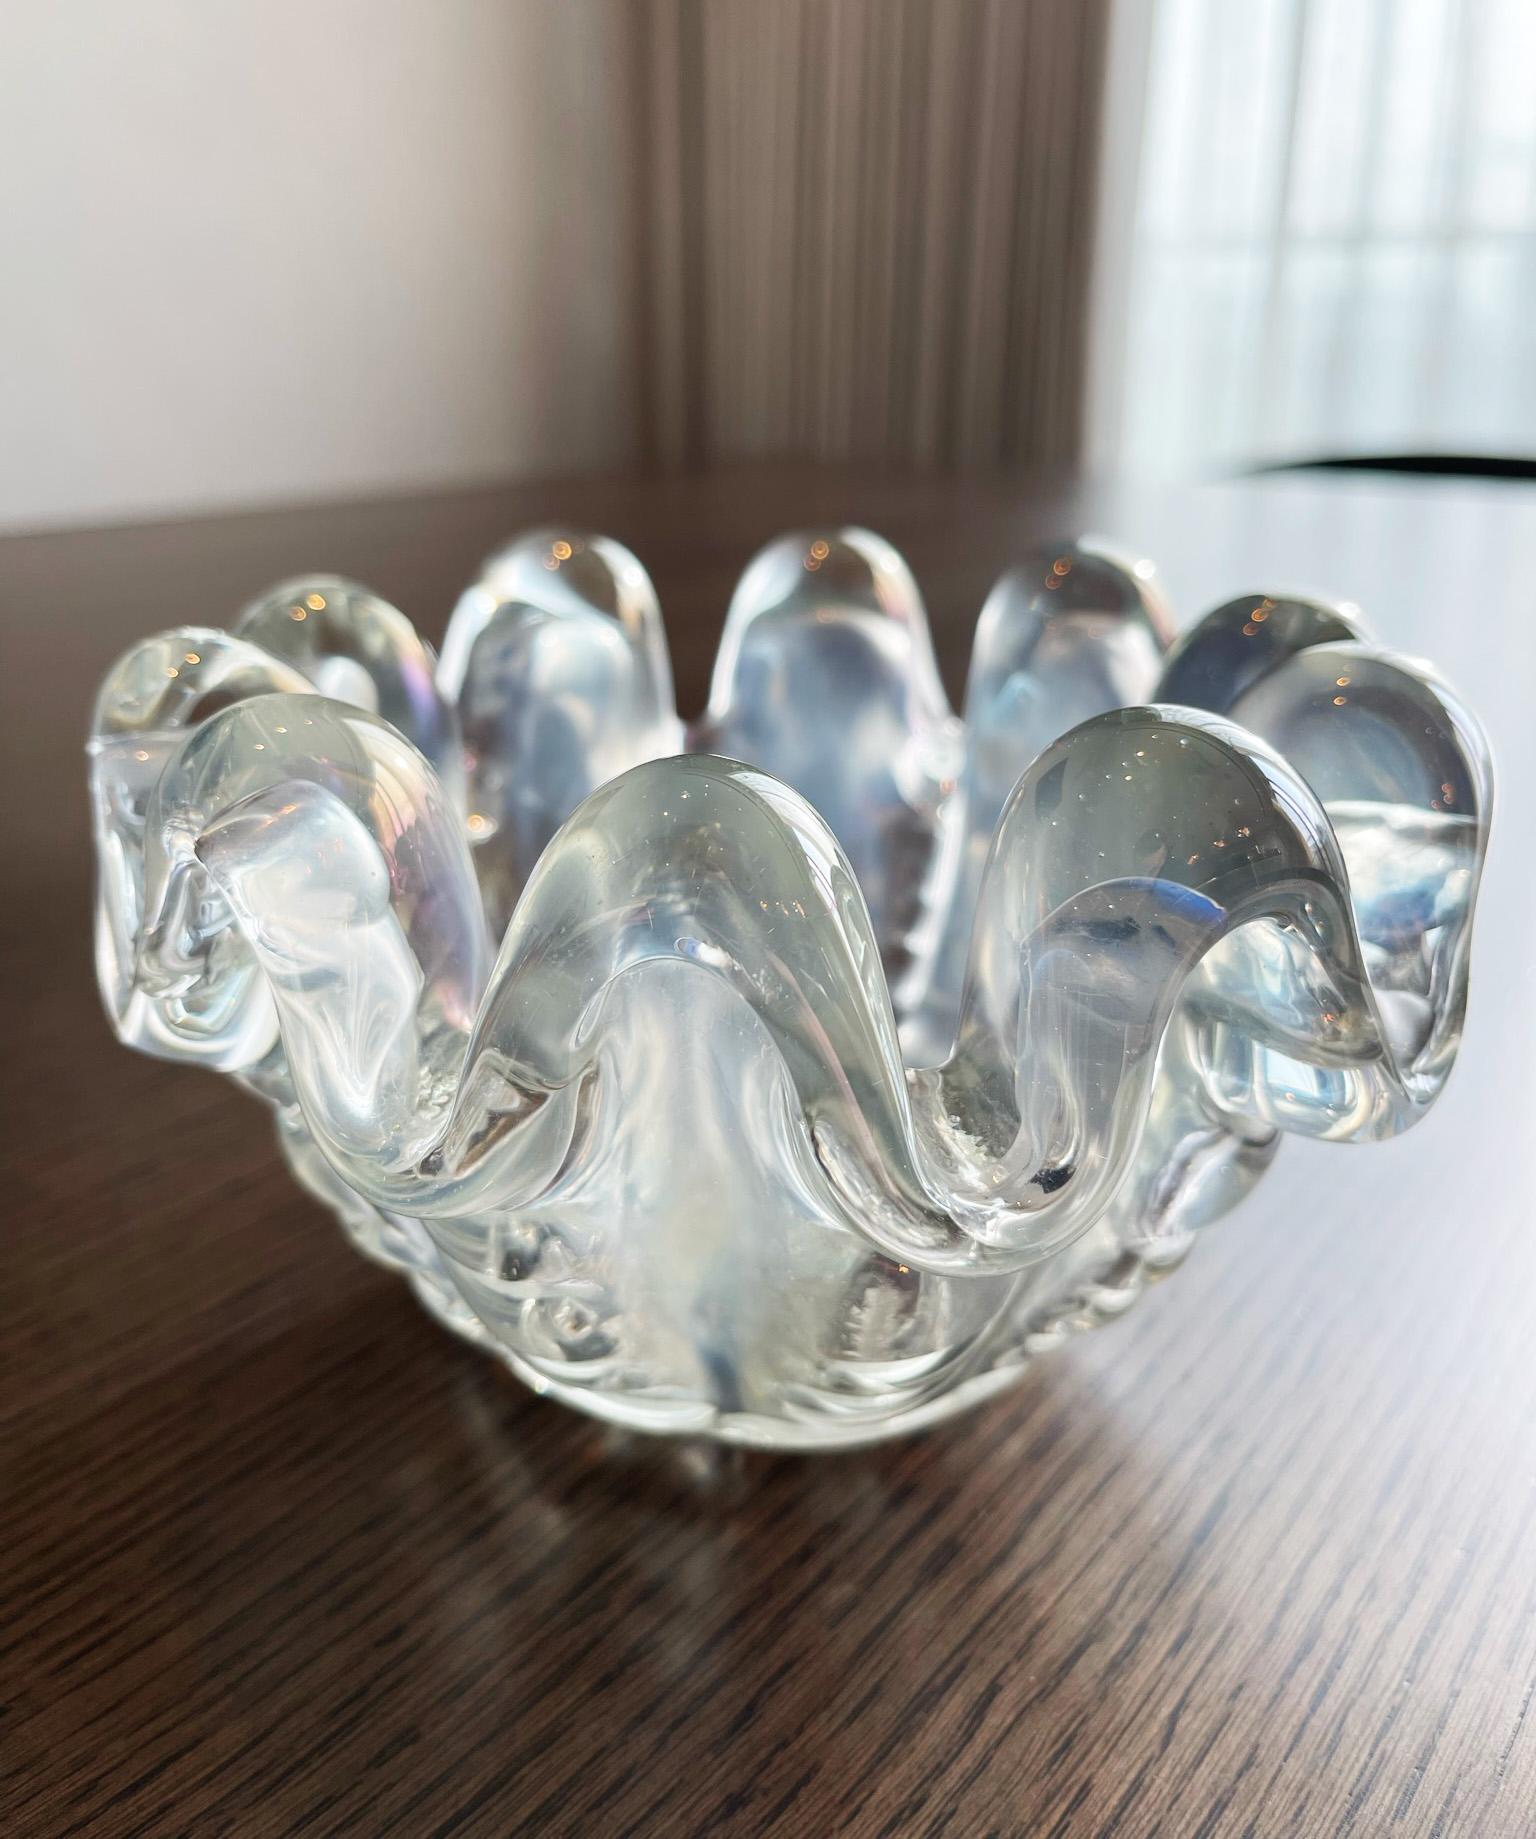 A Murano glass 'Grosse Costolature' bowl by Ercole Barovier.

Created by hand on the the island of Murano, in Italy in the 1940's This piece displays rib like protrusions encircling the bowl; seemingly tenting swathes of thick glass which drape in